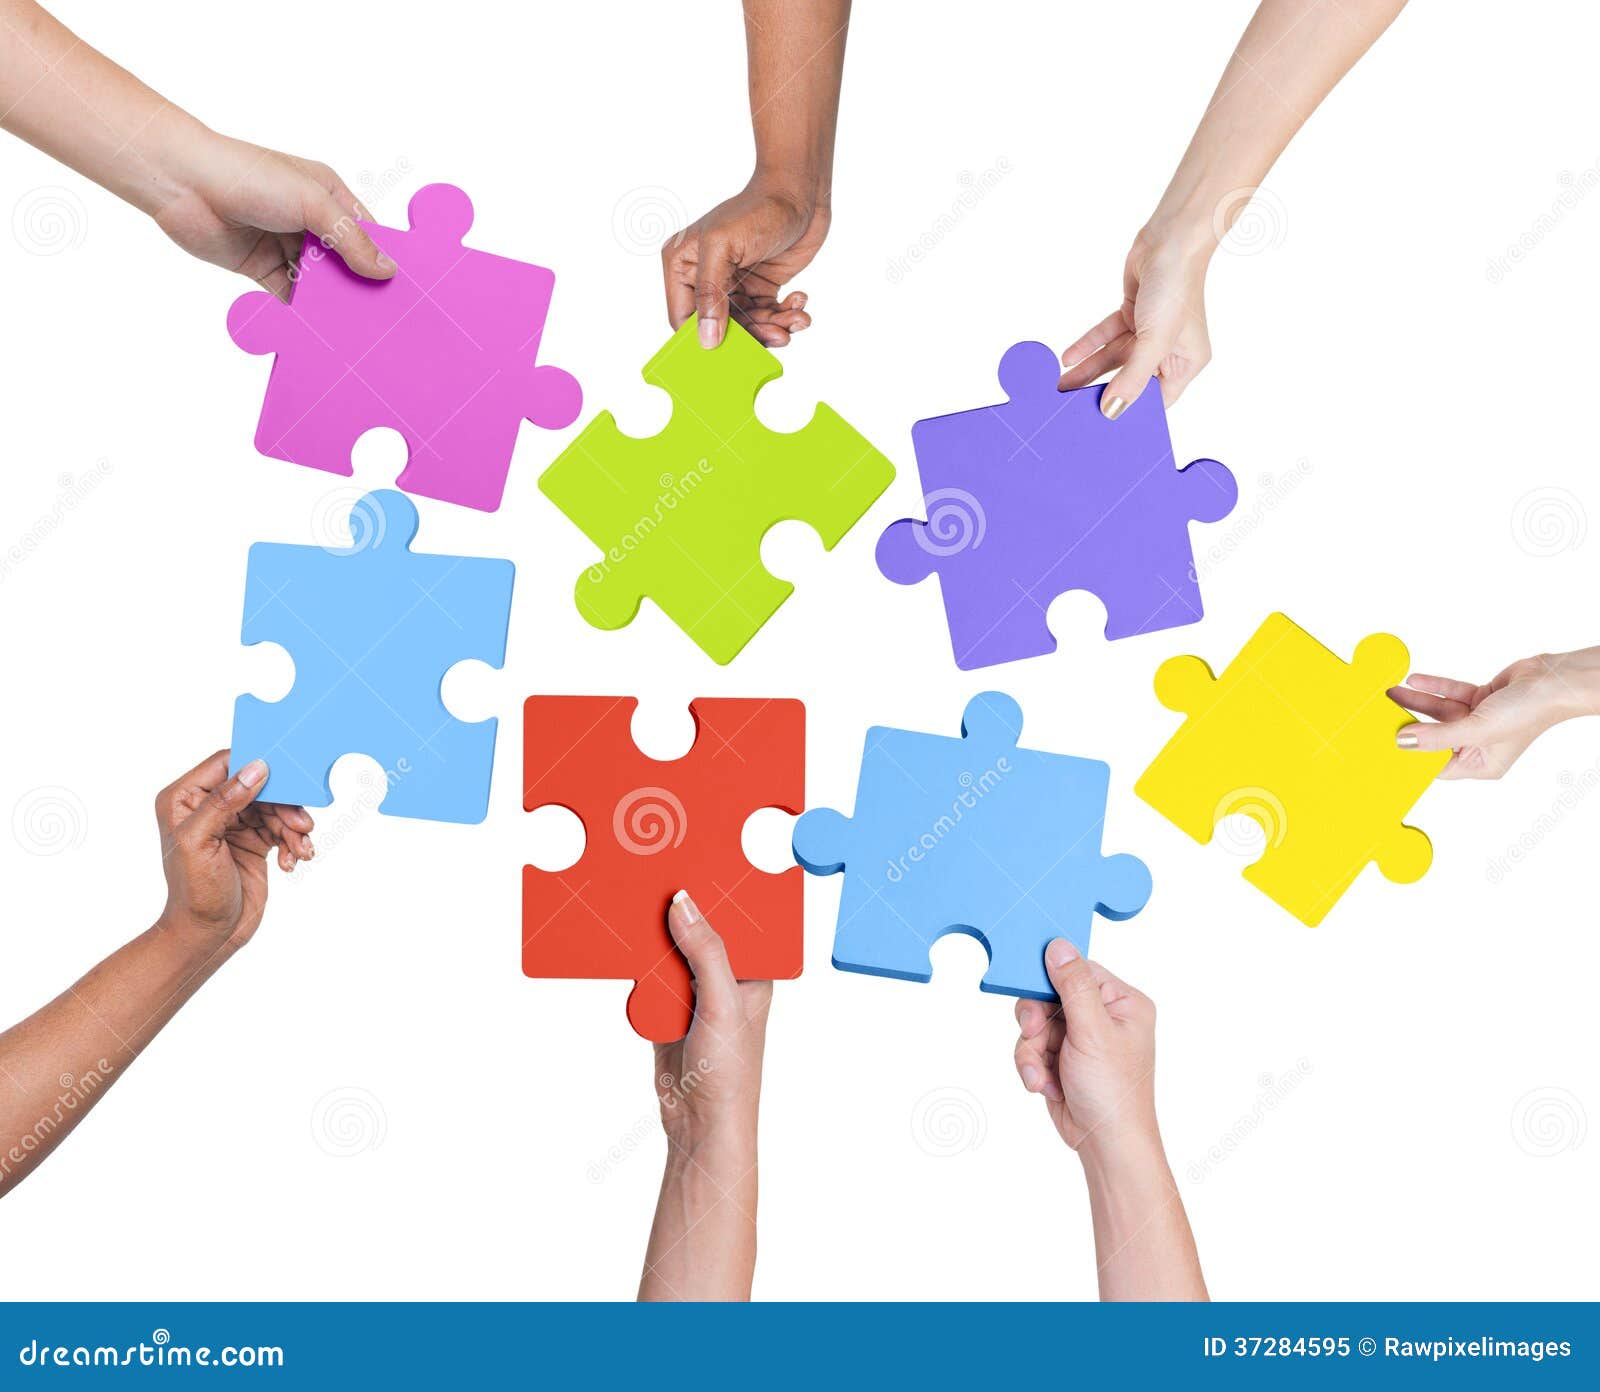 human hands holding jigsaw puzzle